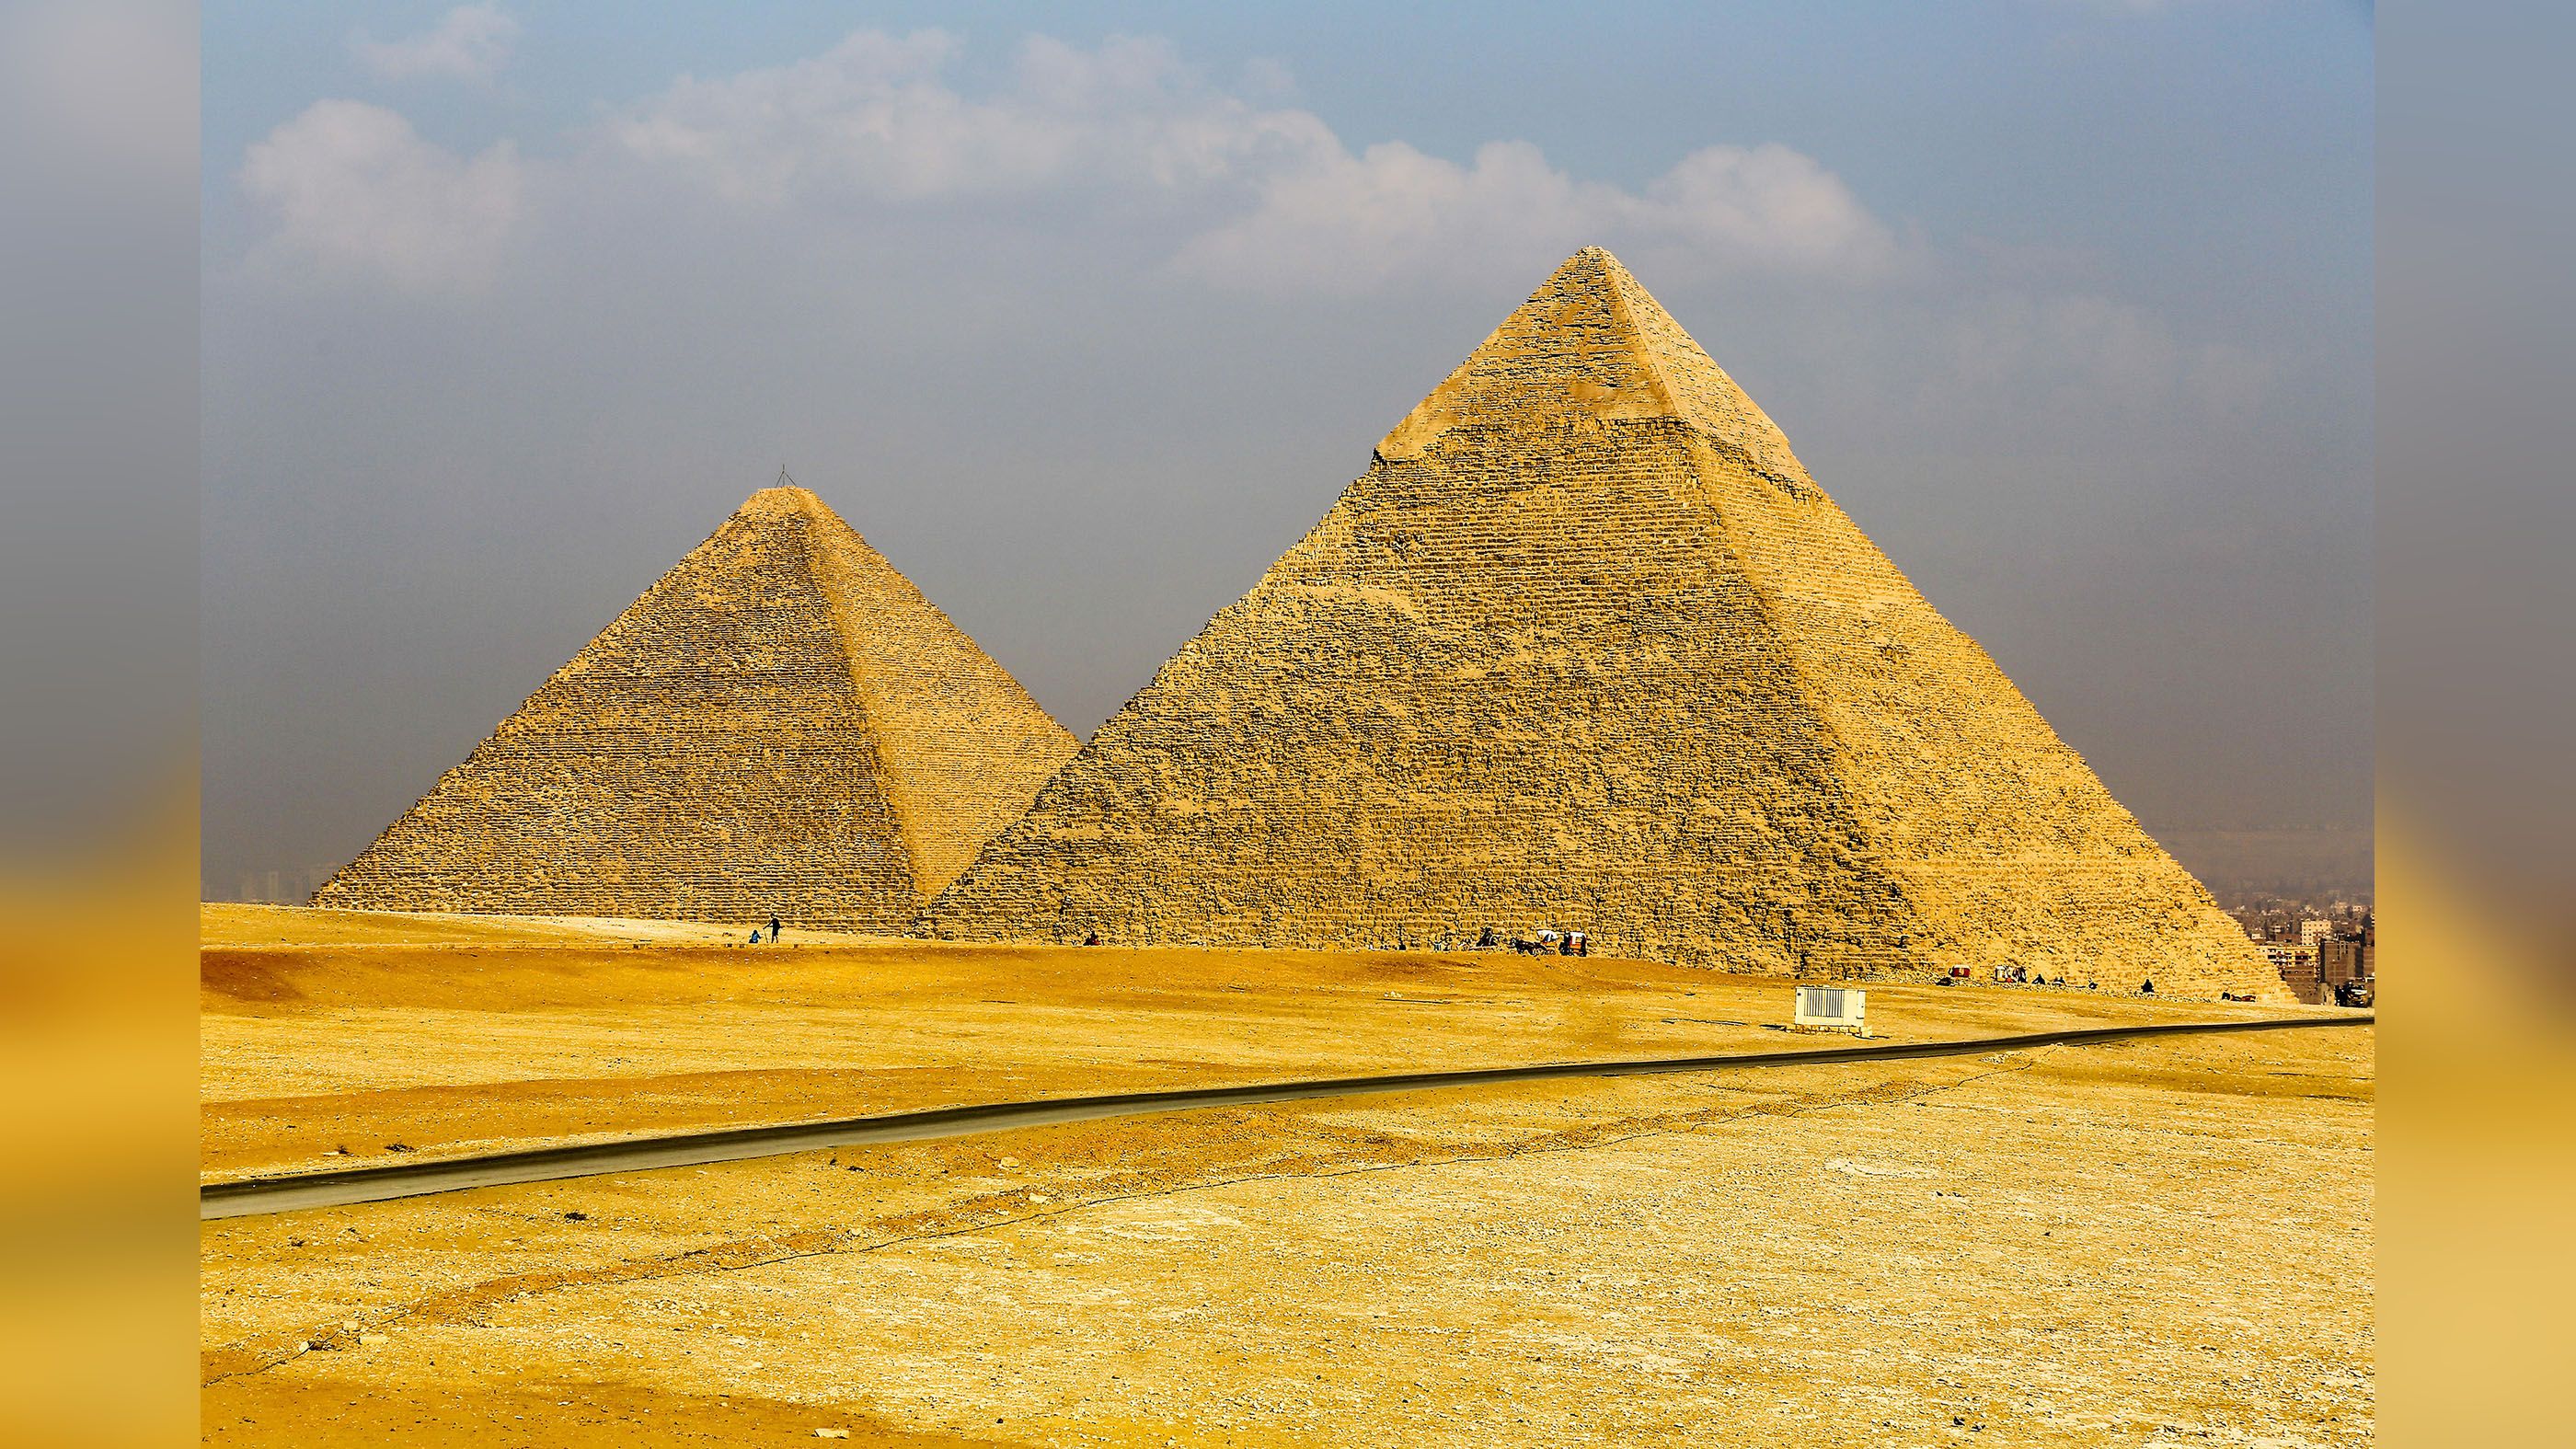 The Great Pyramid of Giza or the Pyramid of Khufu, with the Pyramid of Cheops behind.